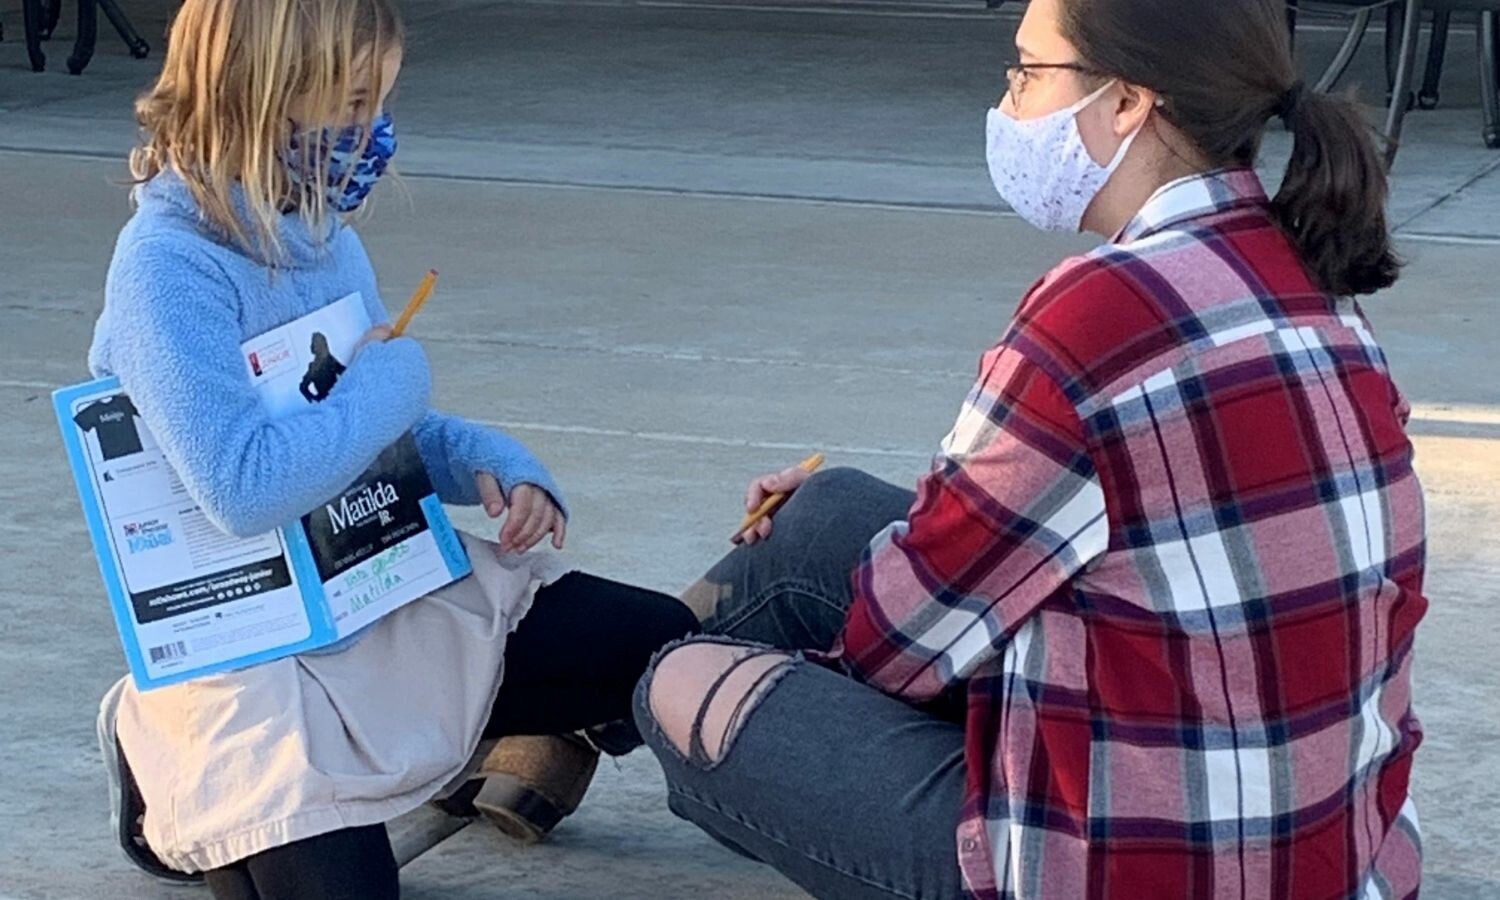 An instructor siting on the ground with a young actor who's holding a script titled Matilda Jr.